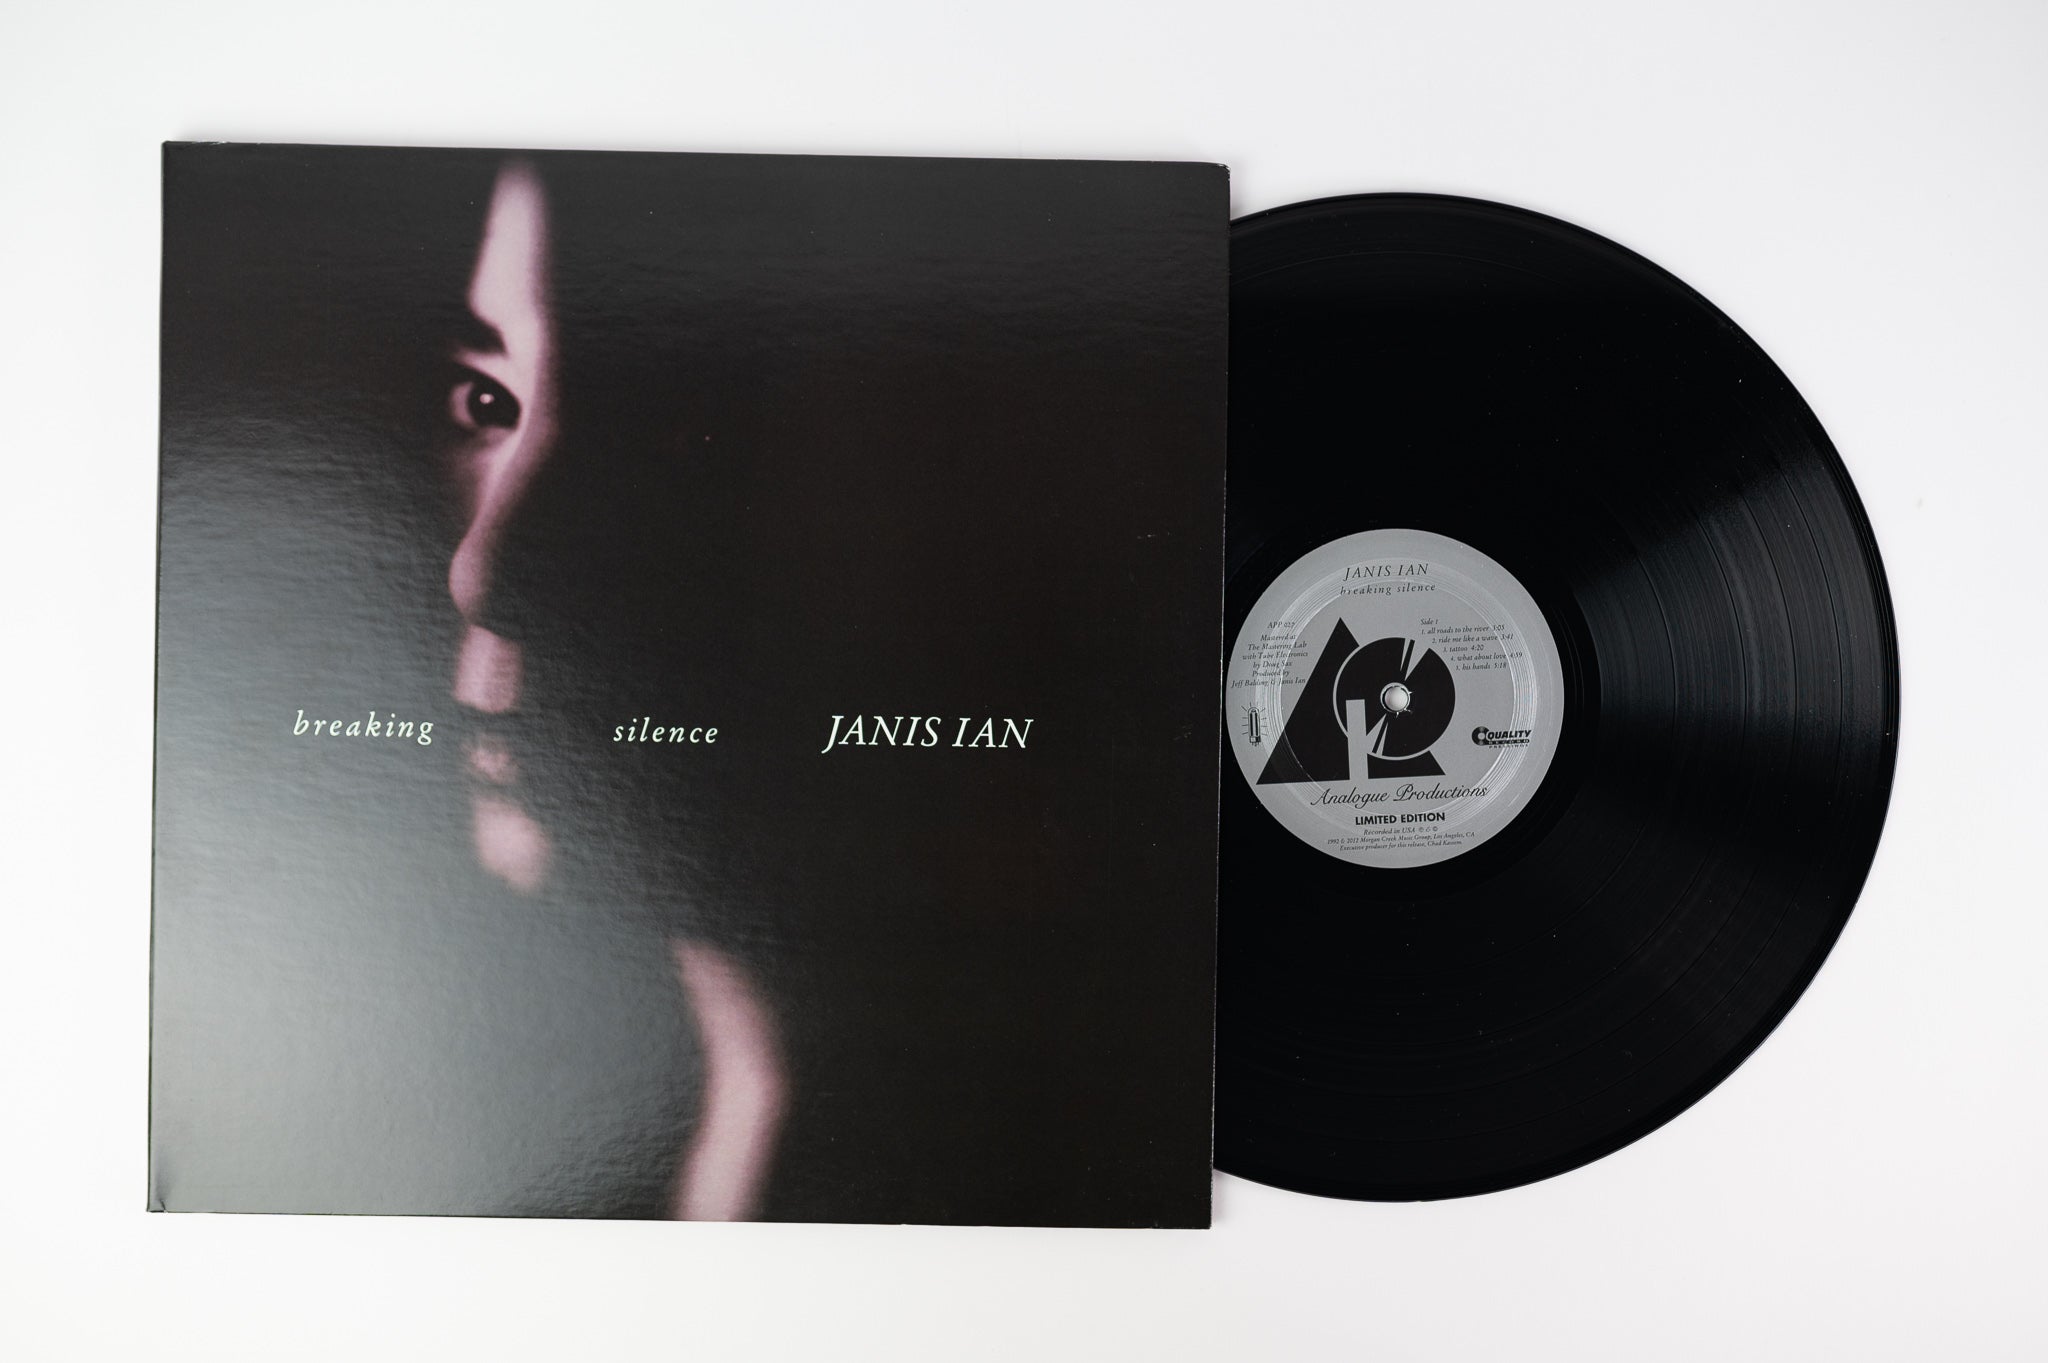 Janis Ian - Breaking Silence on Analogue Productions 200 Gram